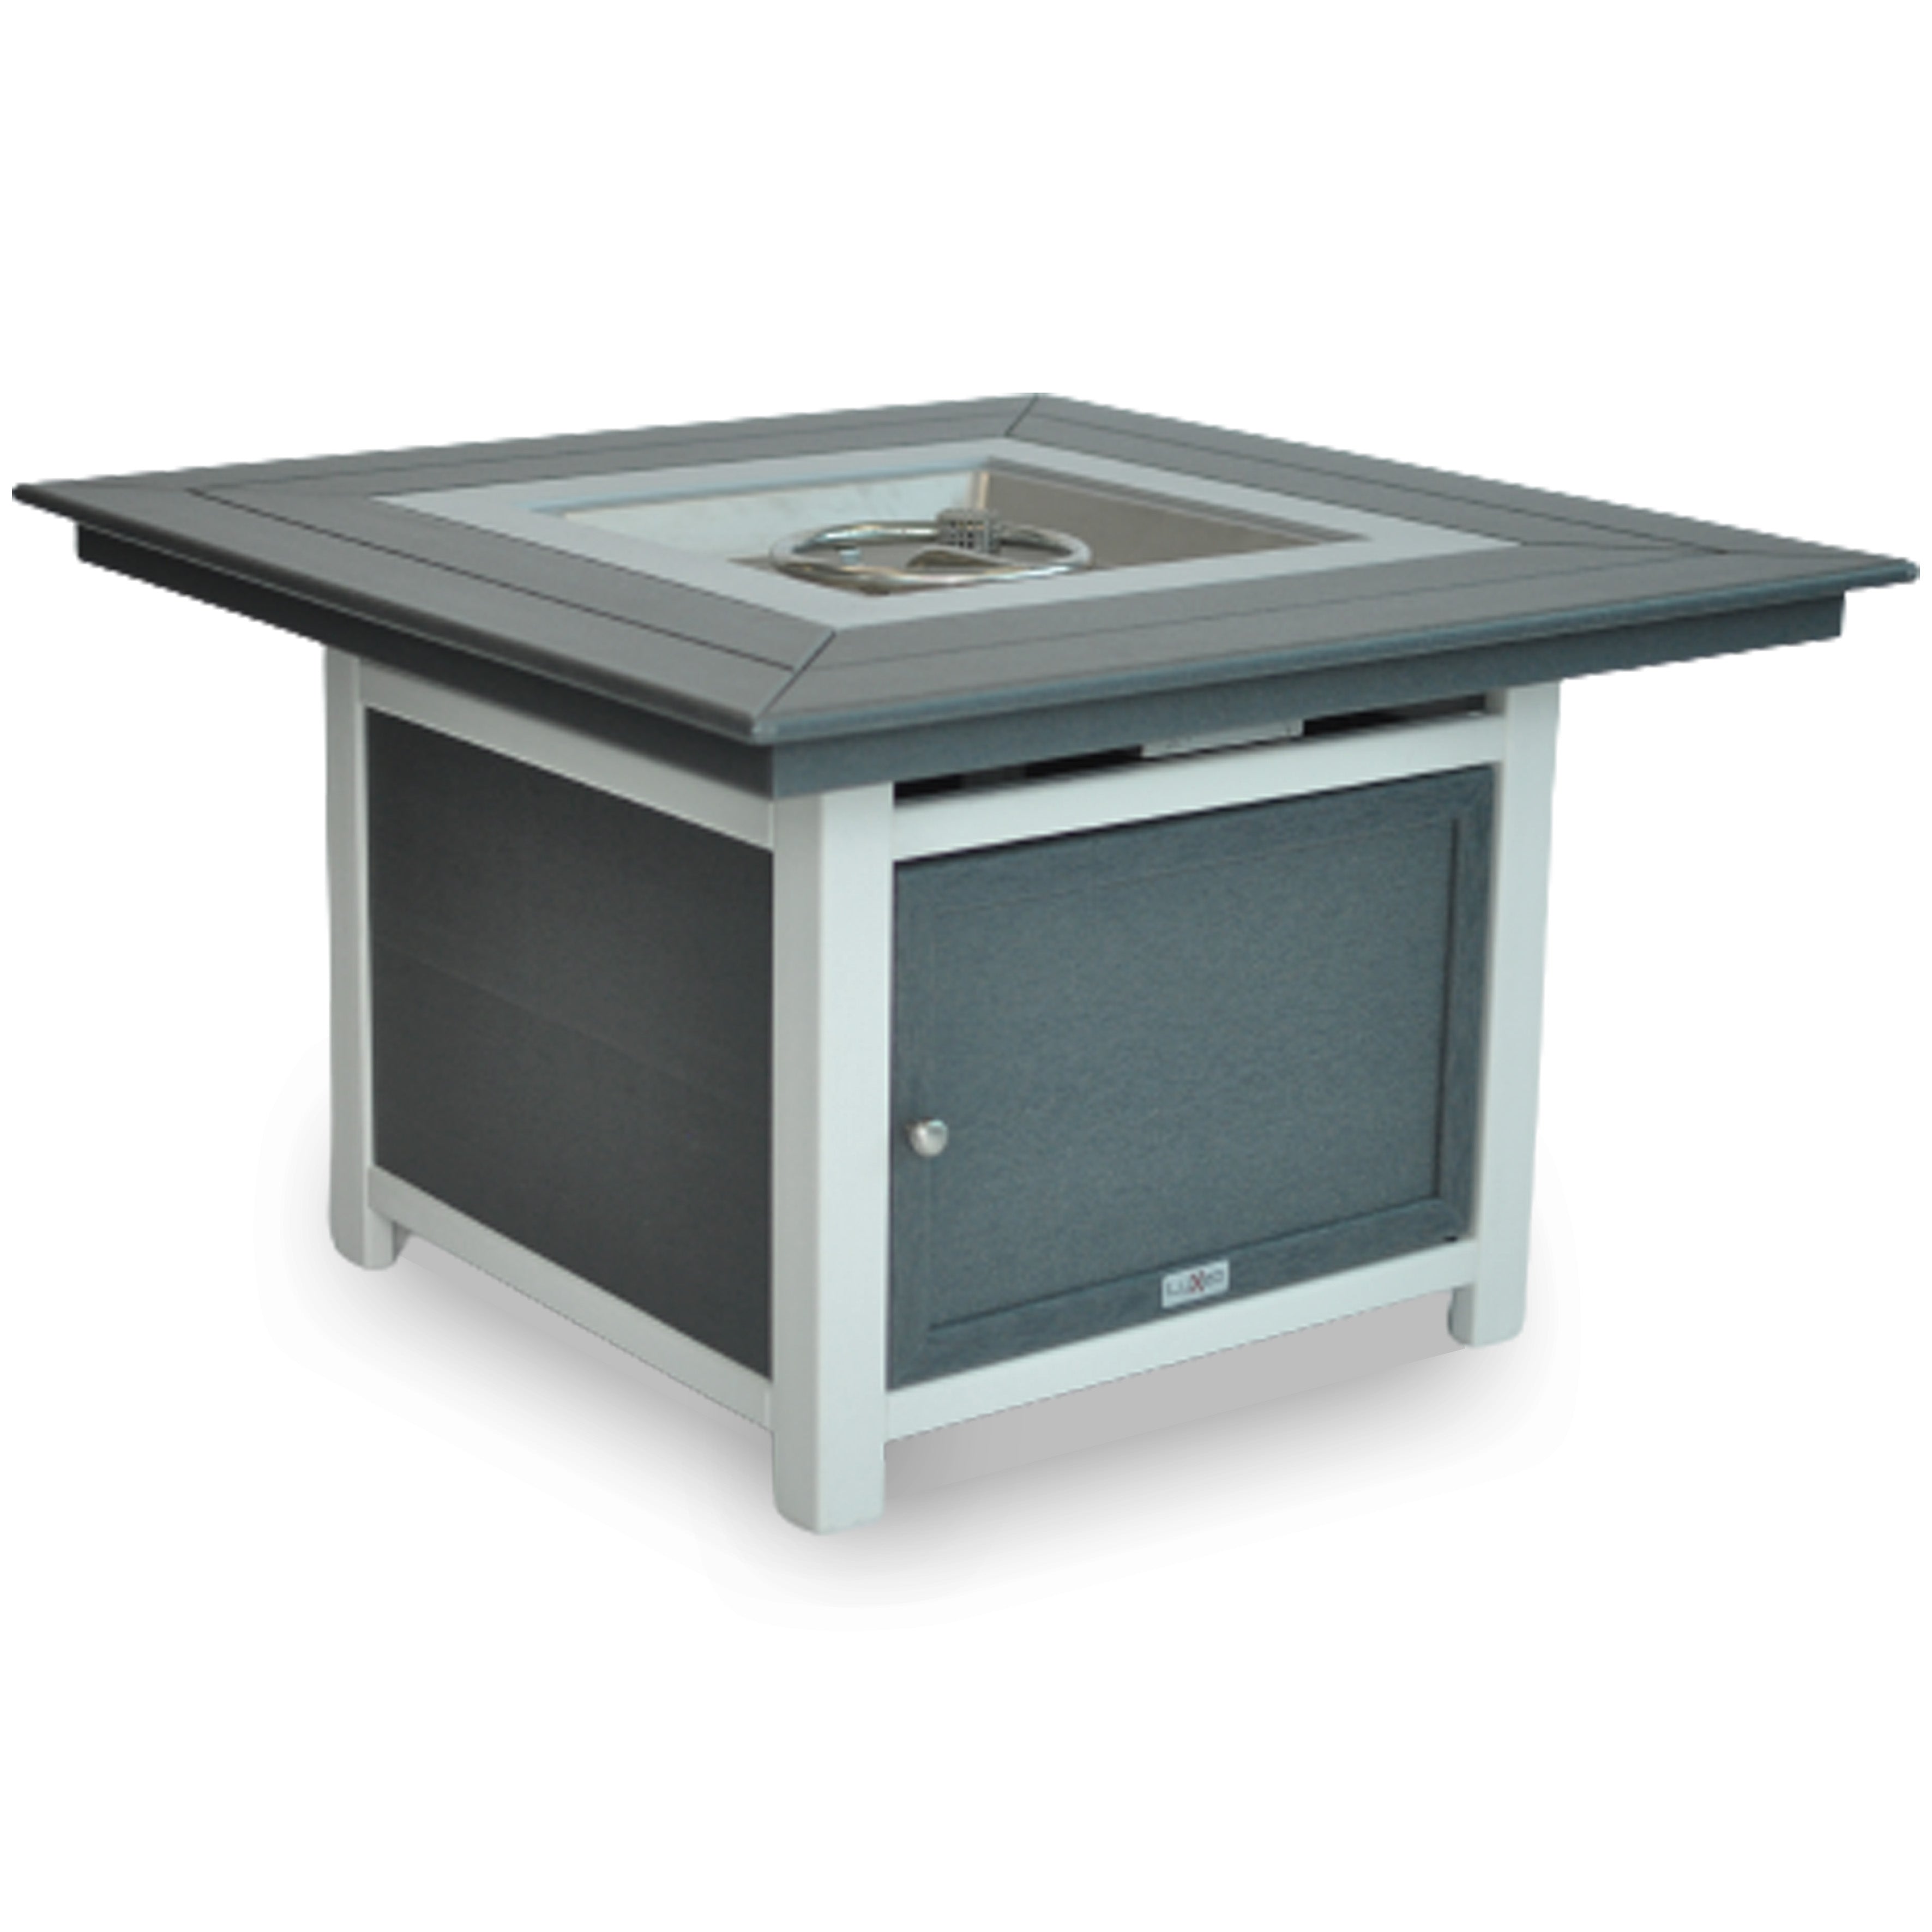 Park City 25"(H) x 42"(W) Square Two-Tone Poly Fire Pit Table